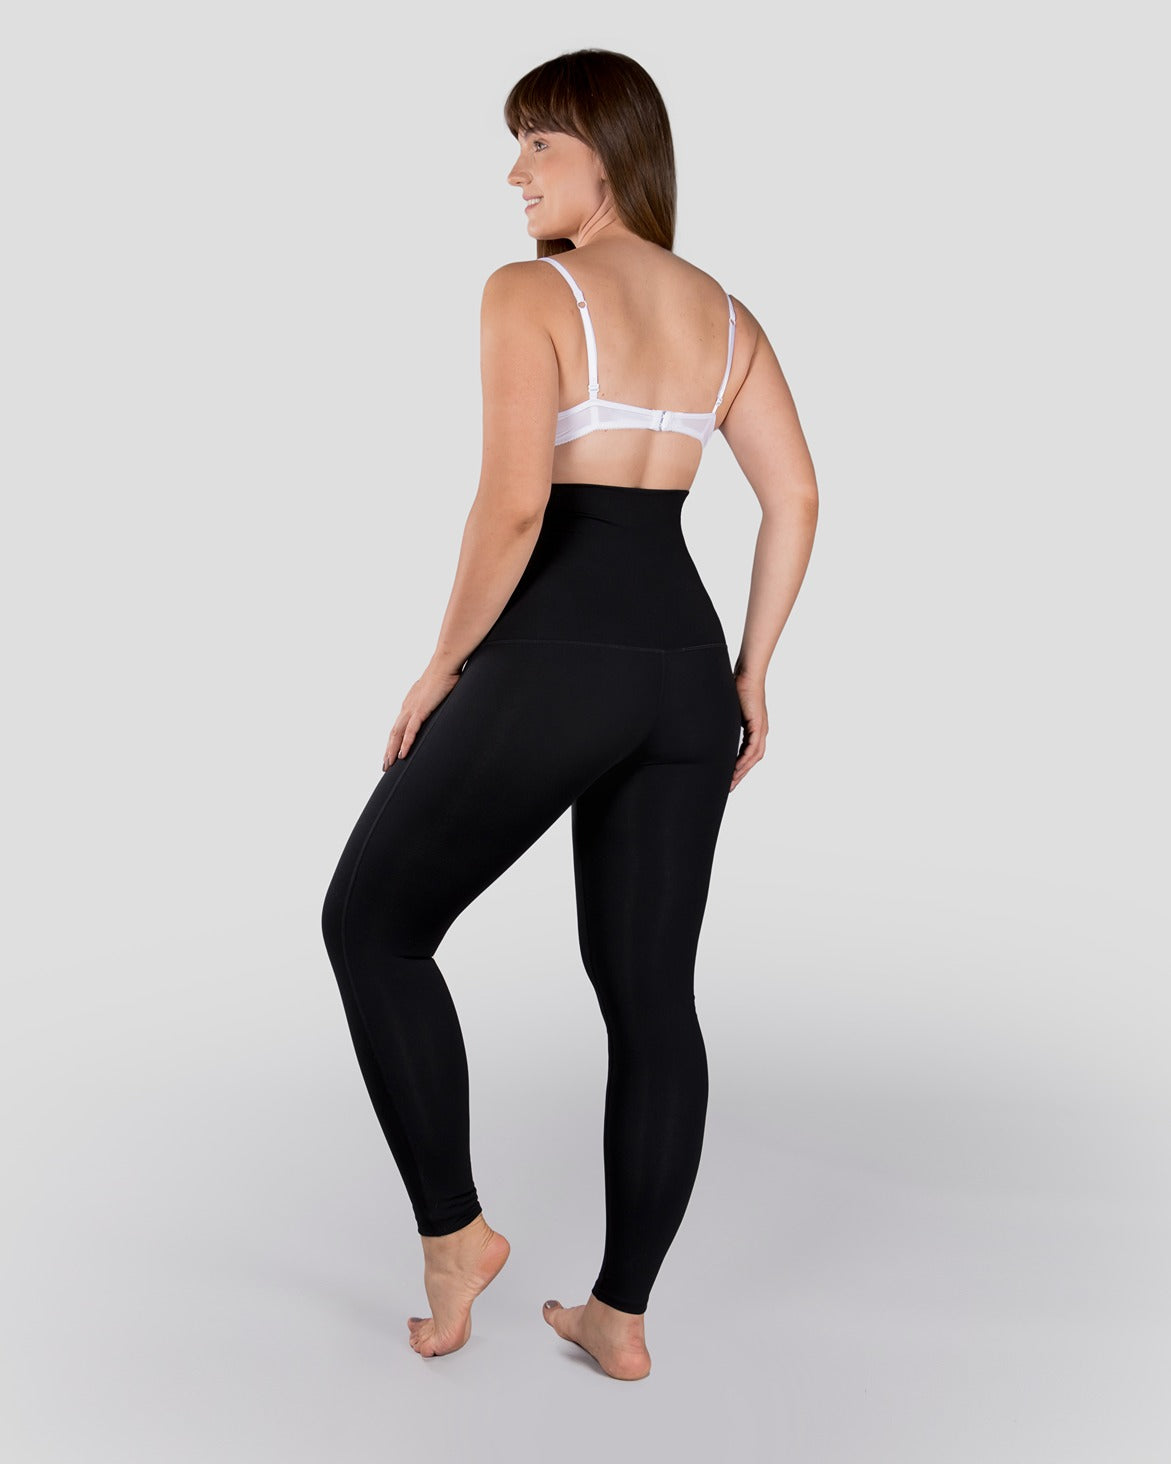 recovery and postpartum compression leggings yoga